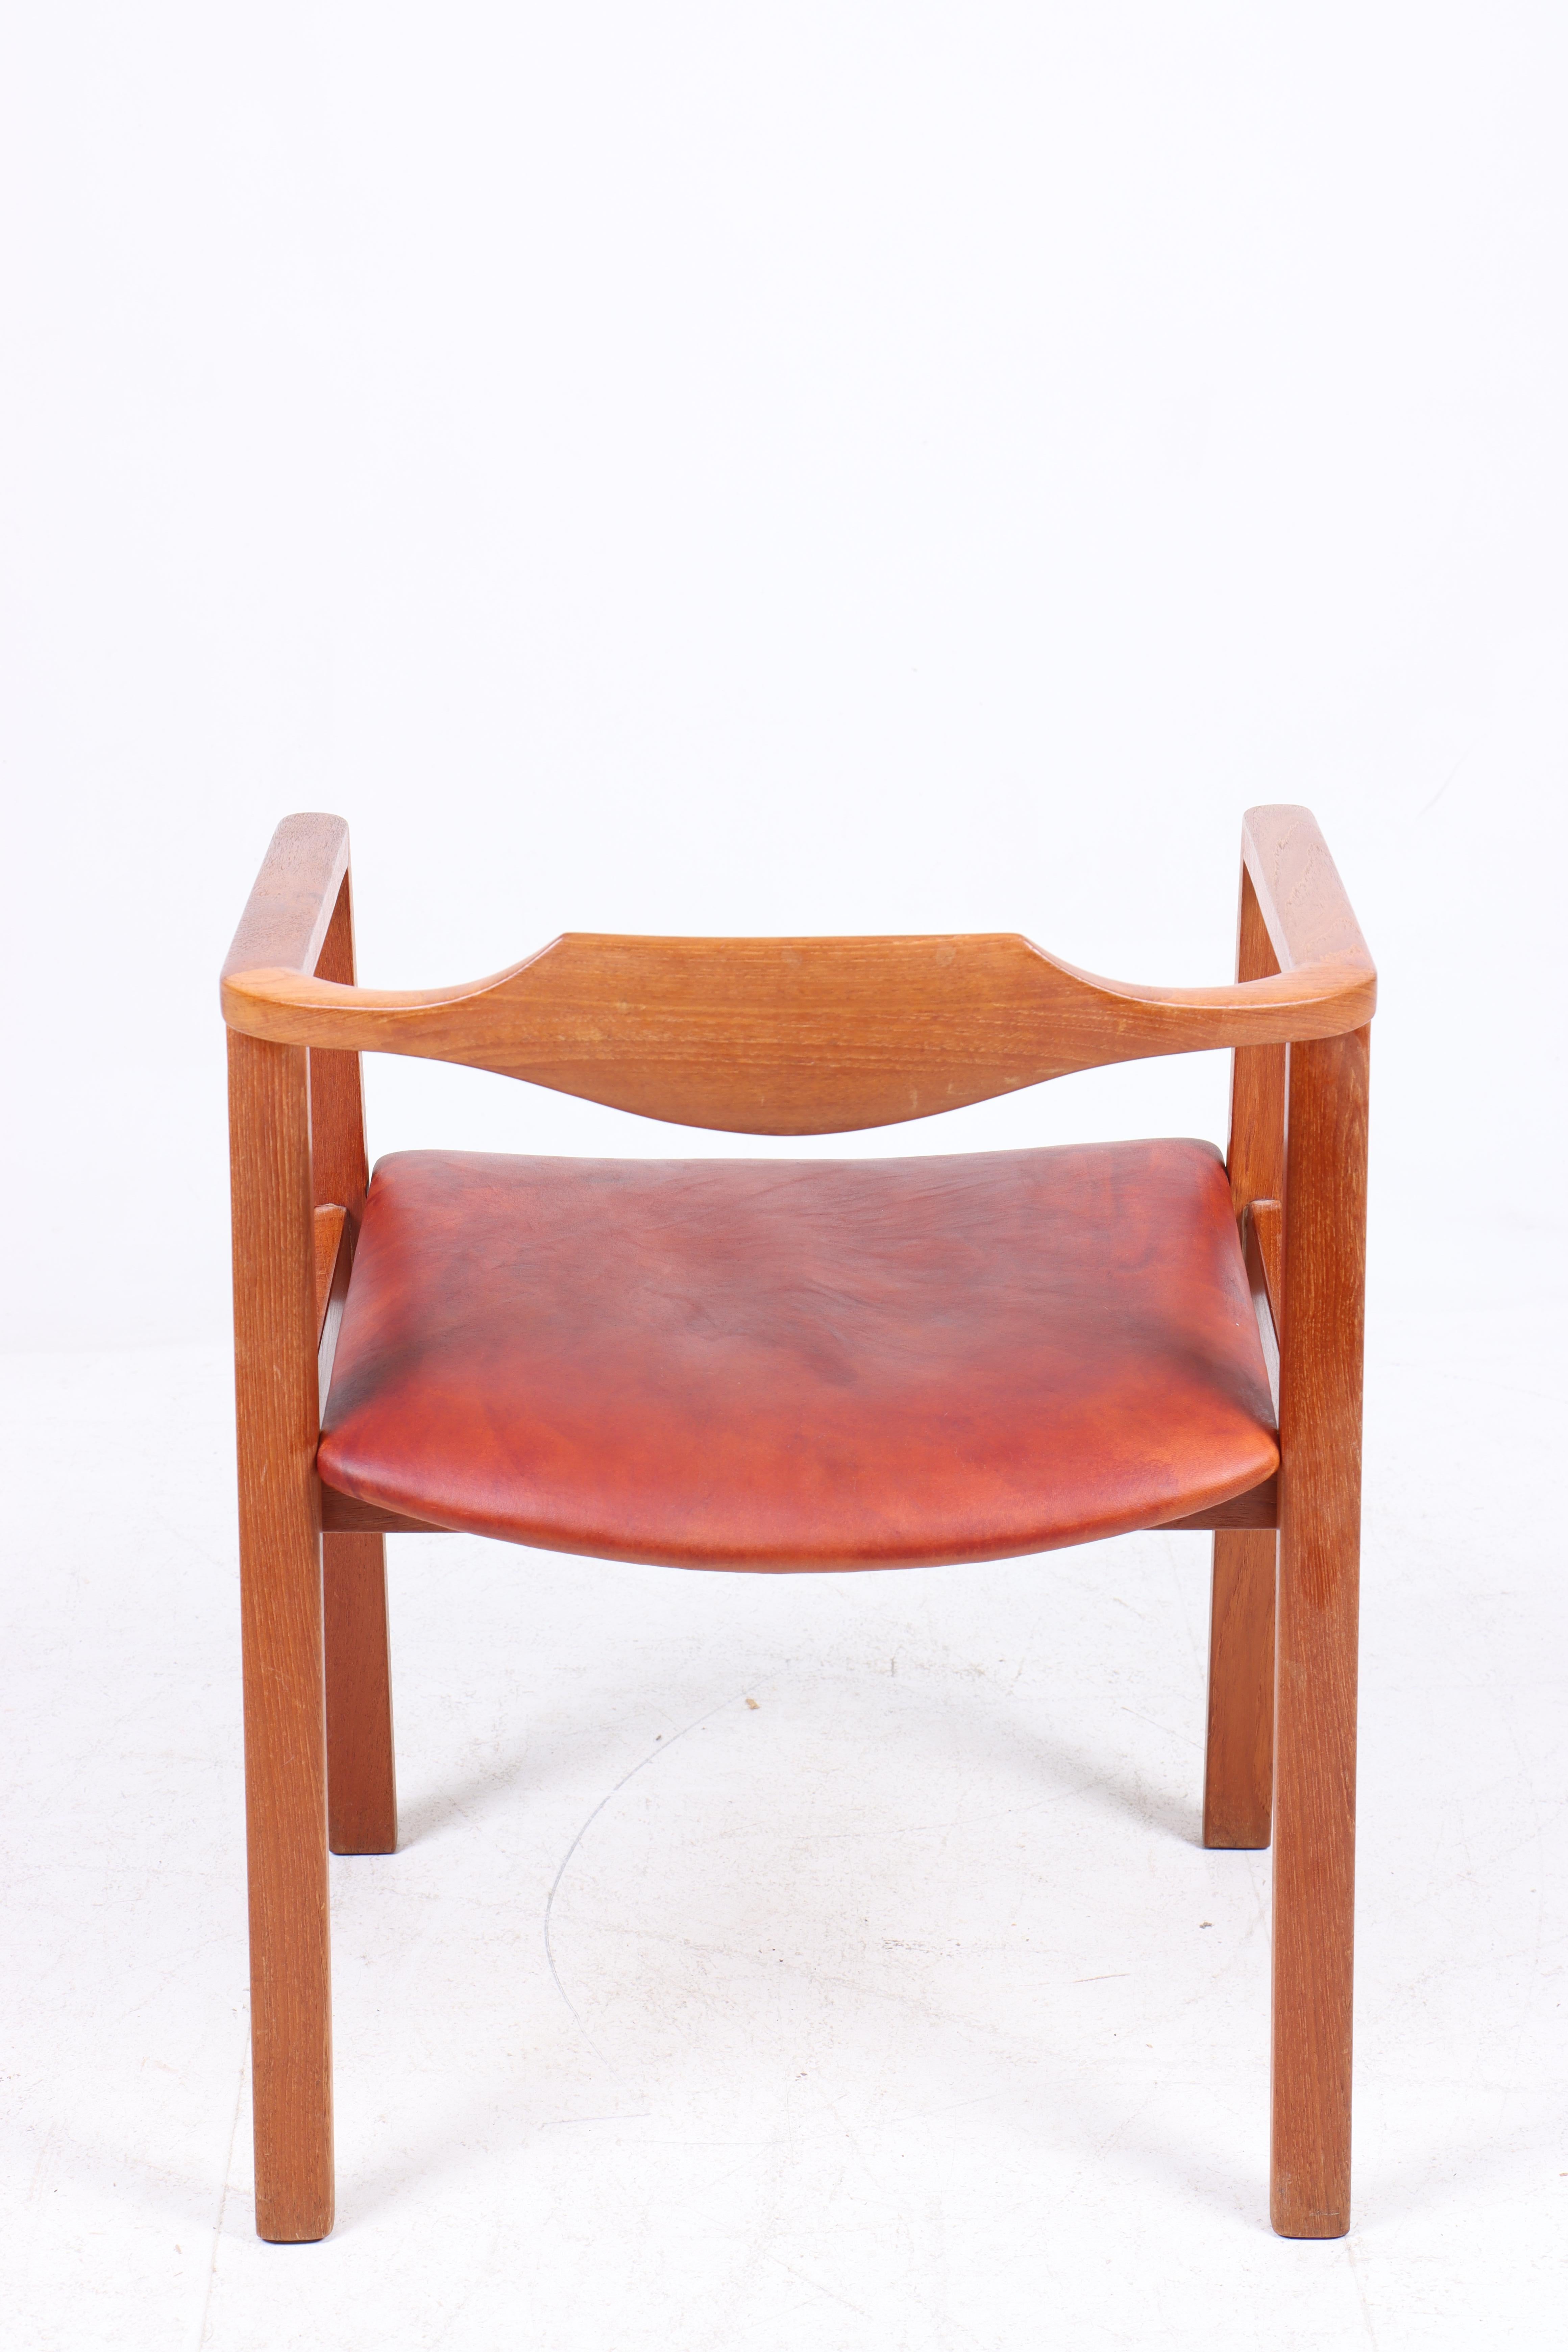 Midcentury Armchair in Teak and Patinated Leather, 1950s For Sale 1